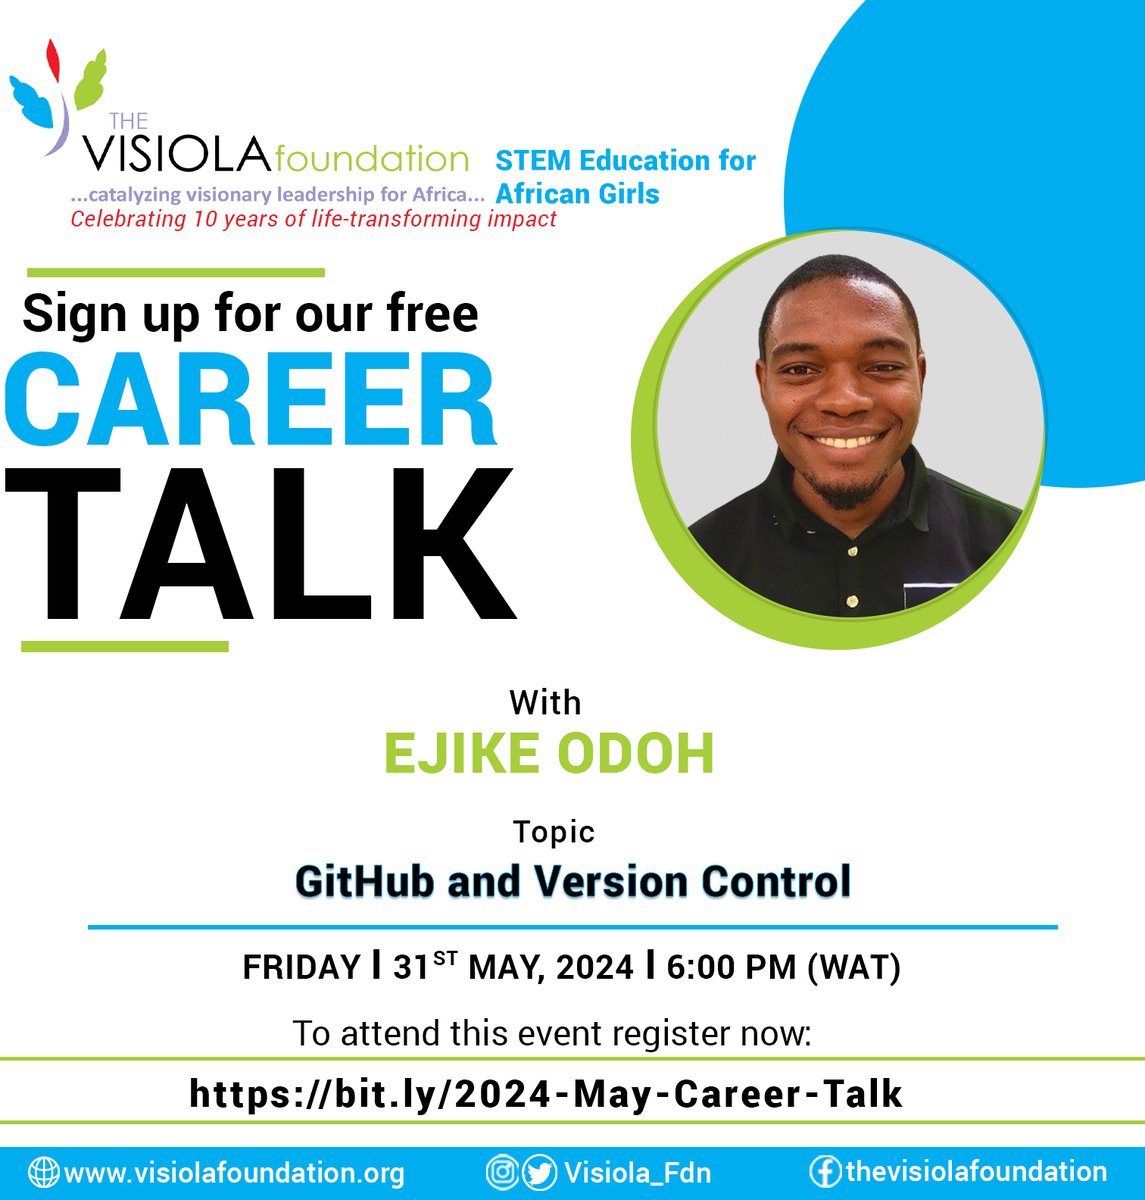 Join us for a free Career Talk with Ejike Odoh on 'GitHub and Version Control' this Friday, 31st May, 2024 at 6:00 PM (WAT). Register now: bit.ly/2024-May-Caree… #VisiolaFoundation #CareerTalk #GitHub